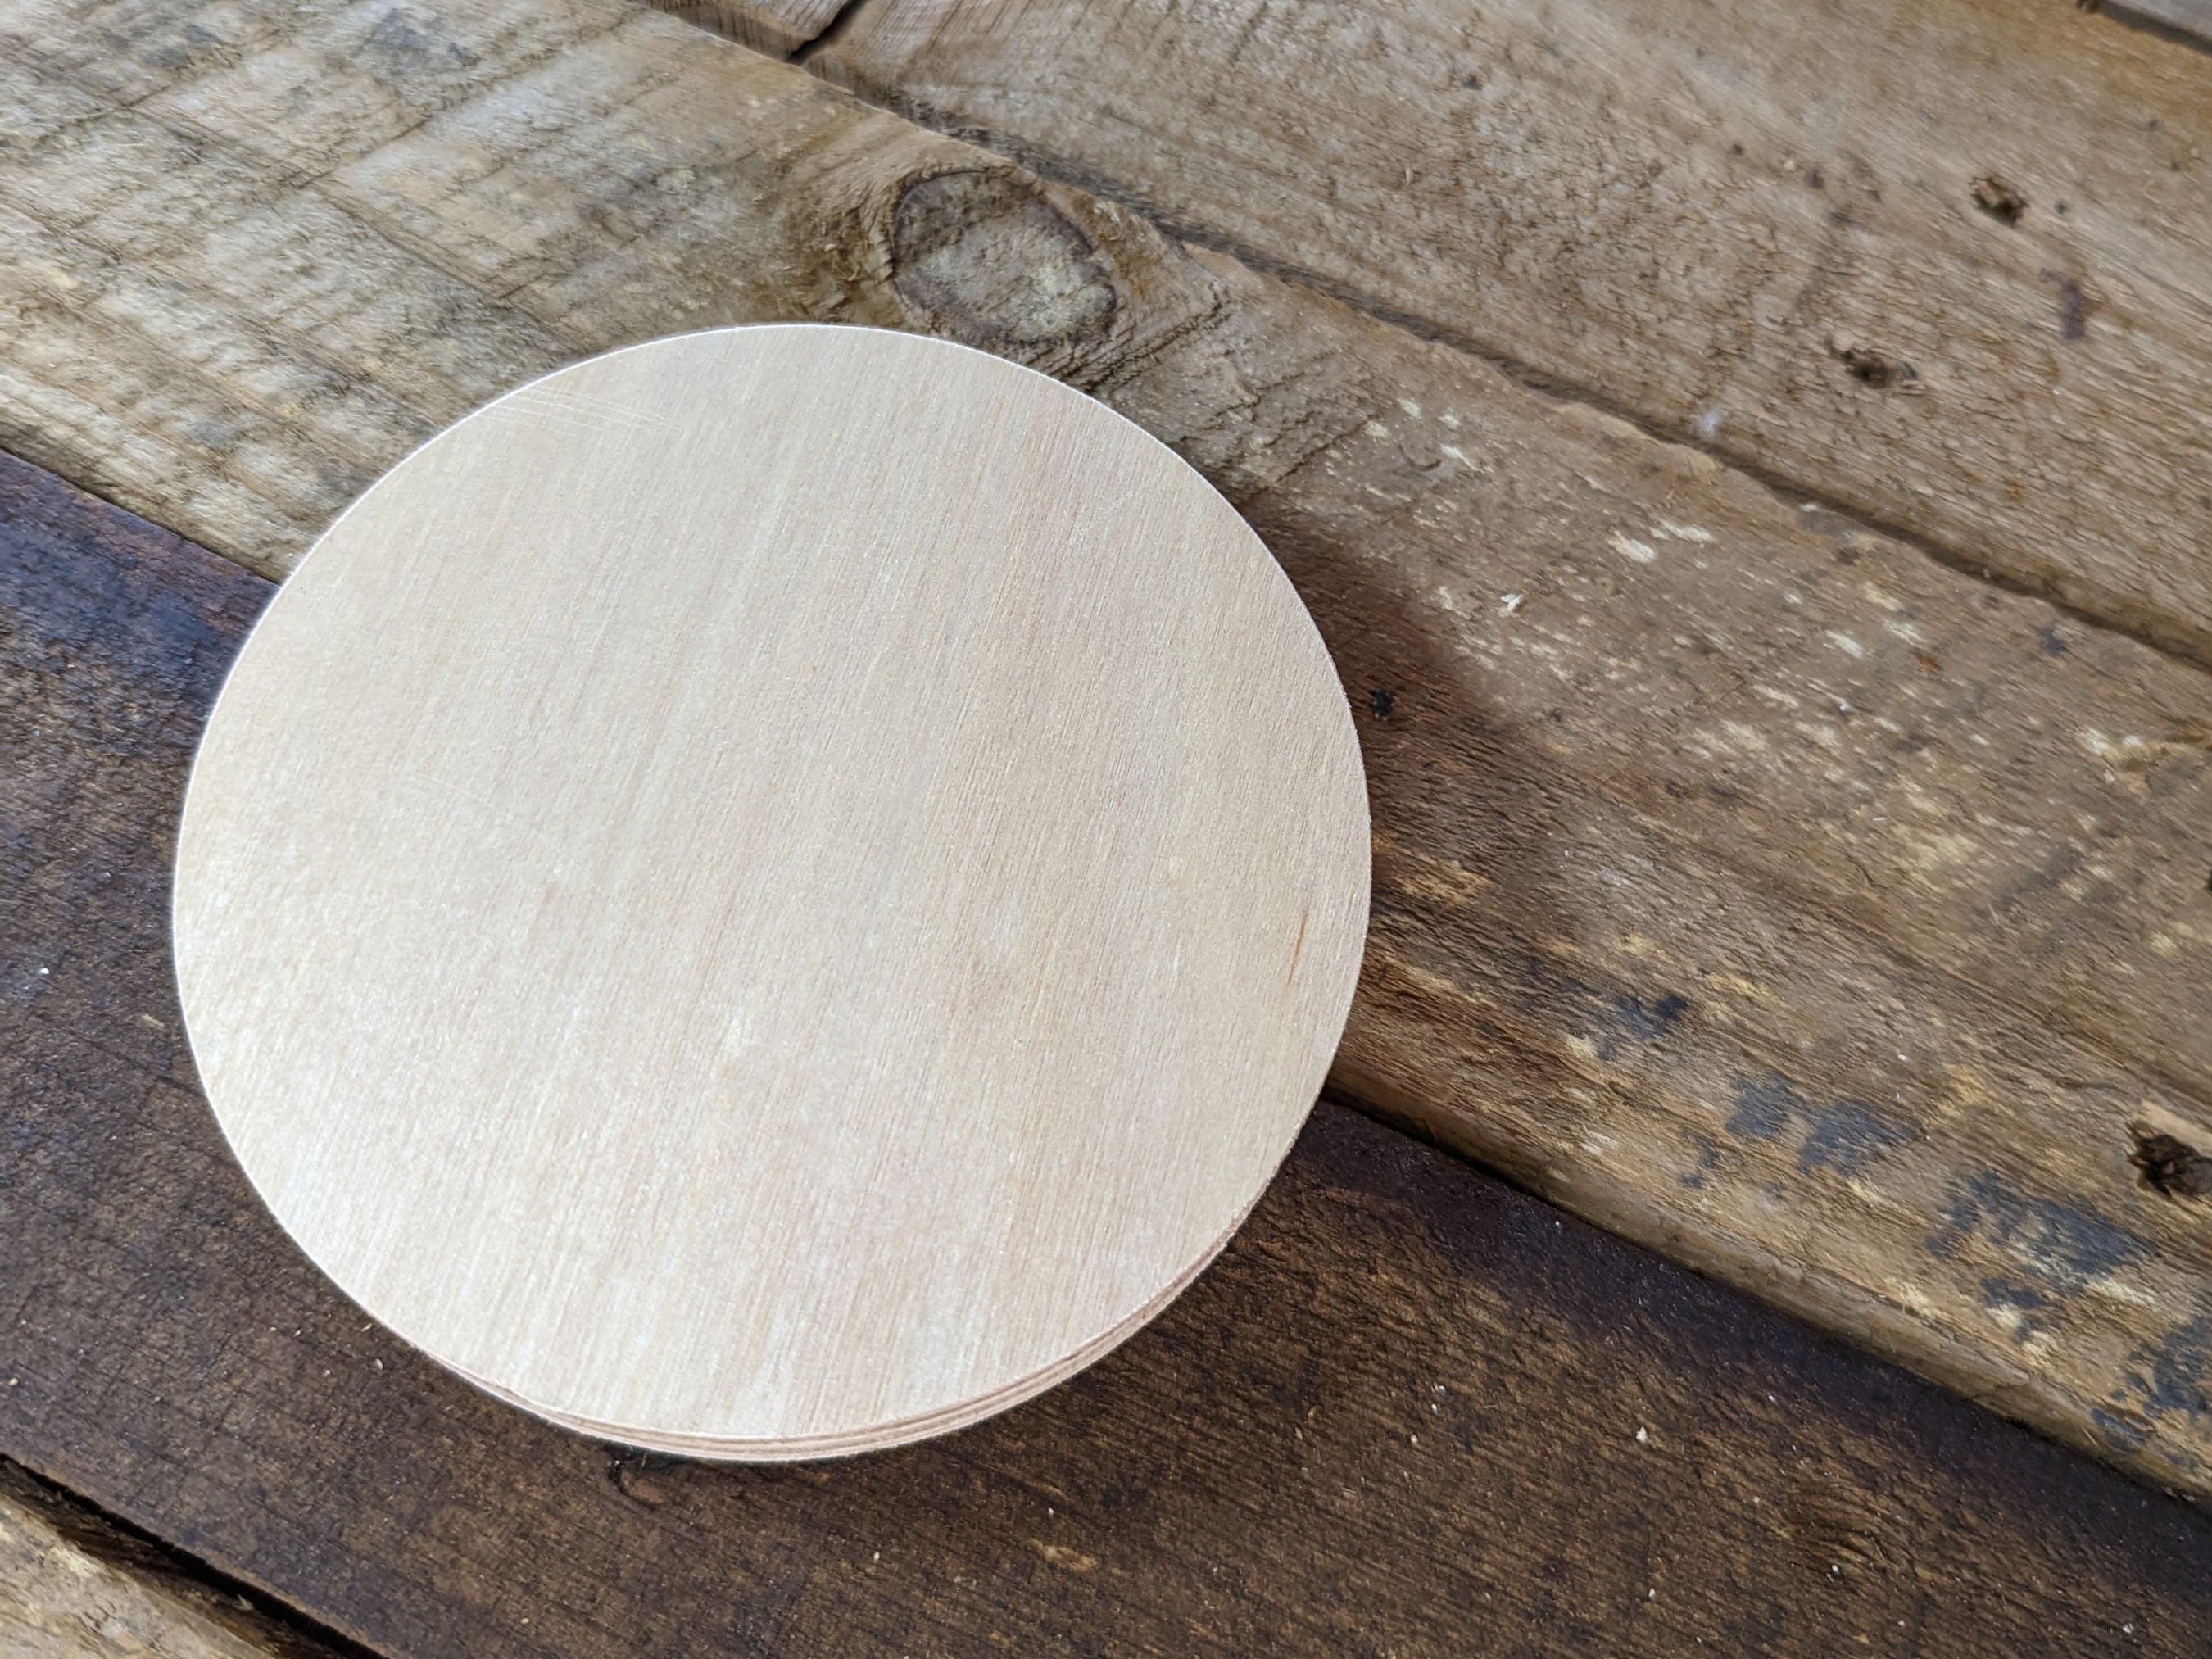 1.5 Inch Wood Circles, 1/4 Inch Thick Birch 1 1/2 Inch Diameter Birch Wood  Rounds, Craft Supplies, DIY Wooden Circles for Crafting